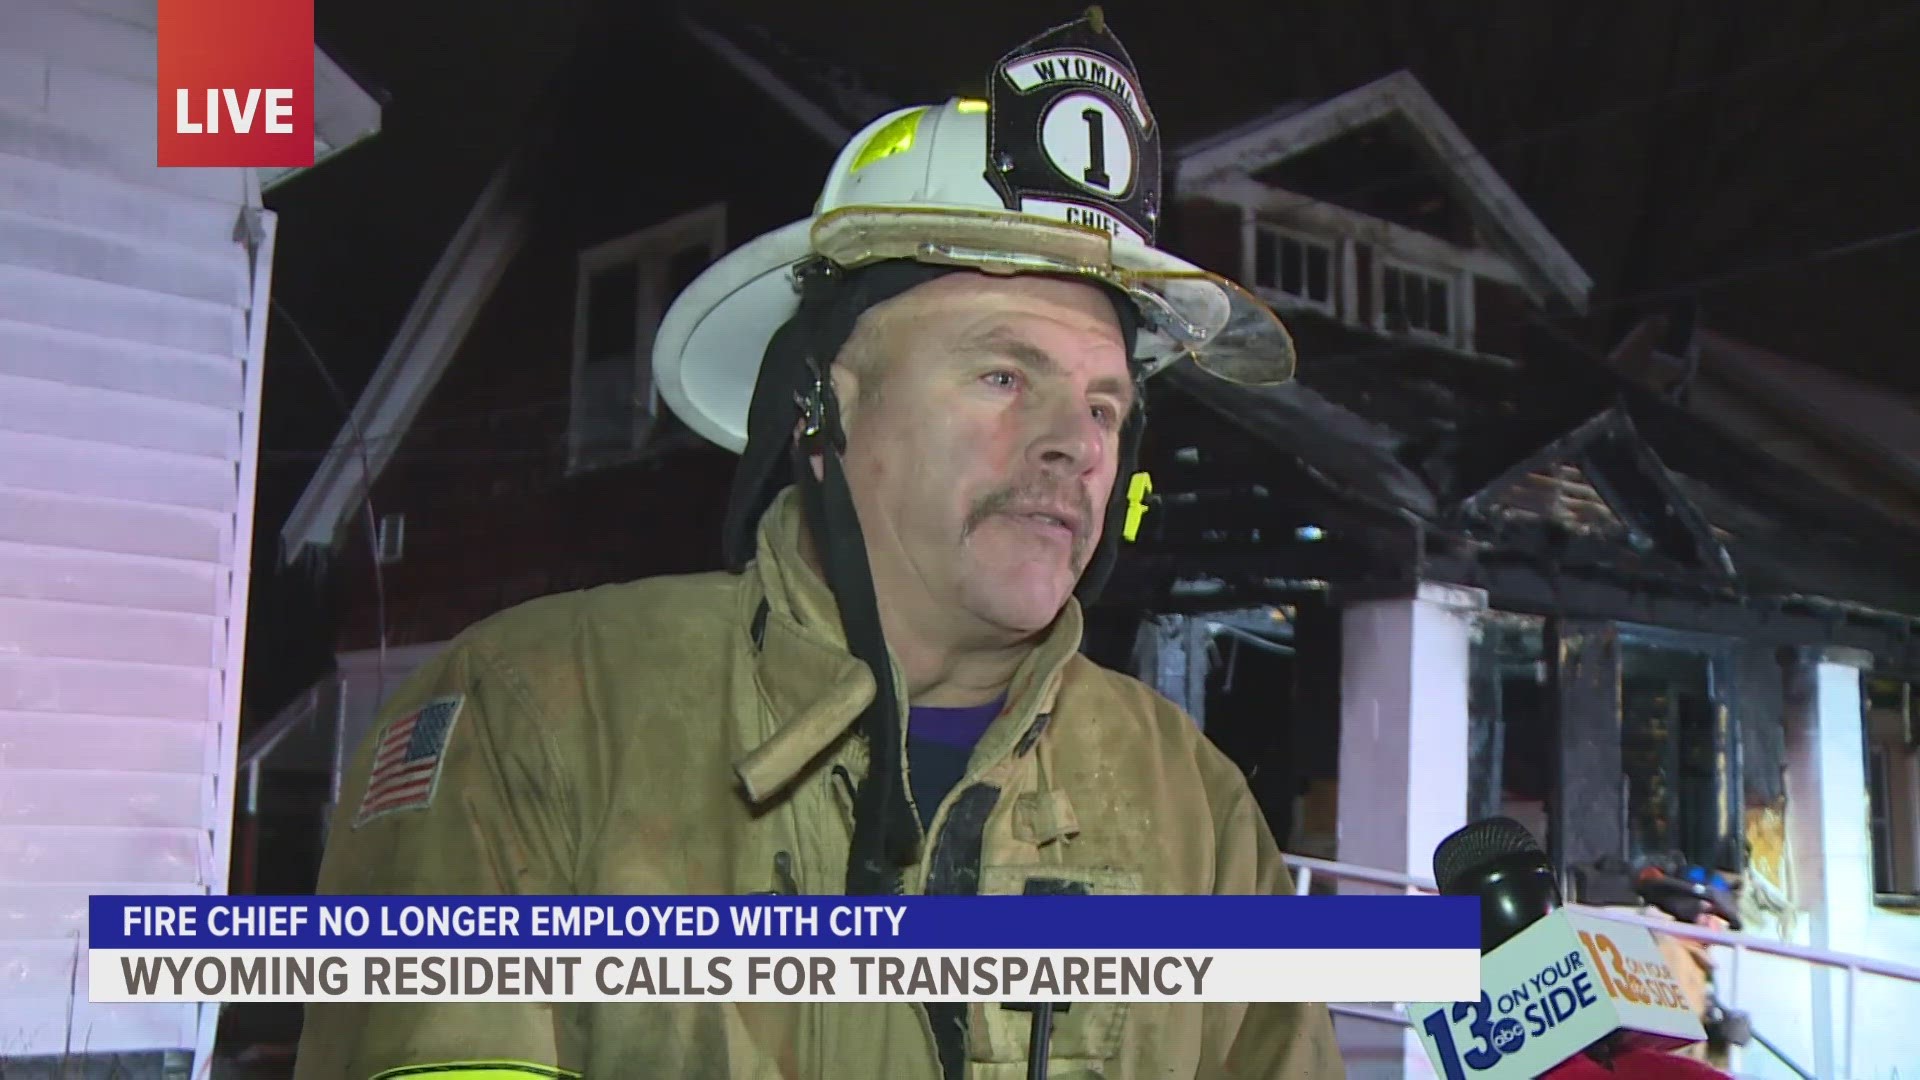 Wyoming residents calling for transparency after fire department chief departs.